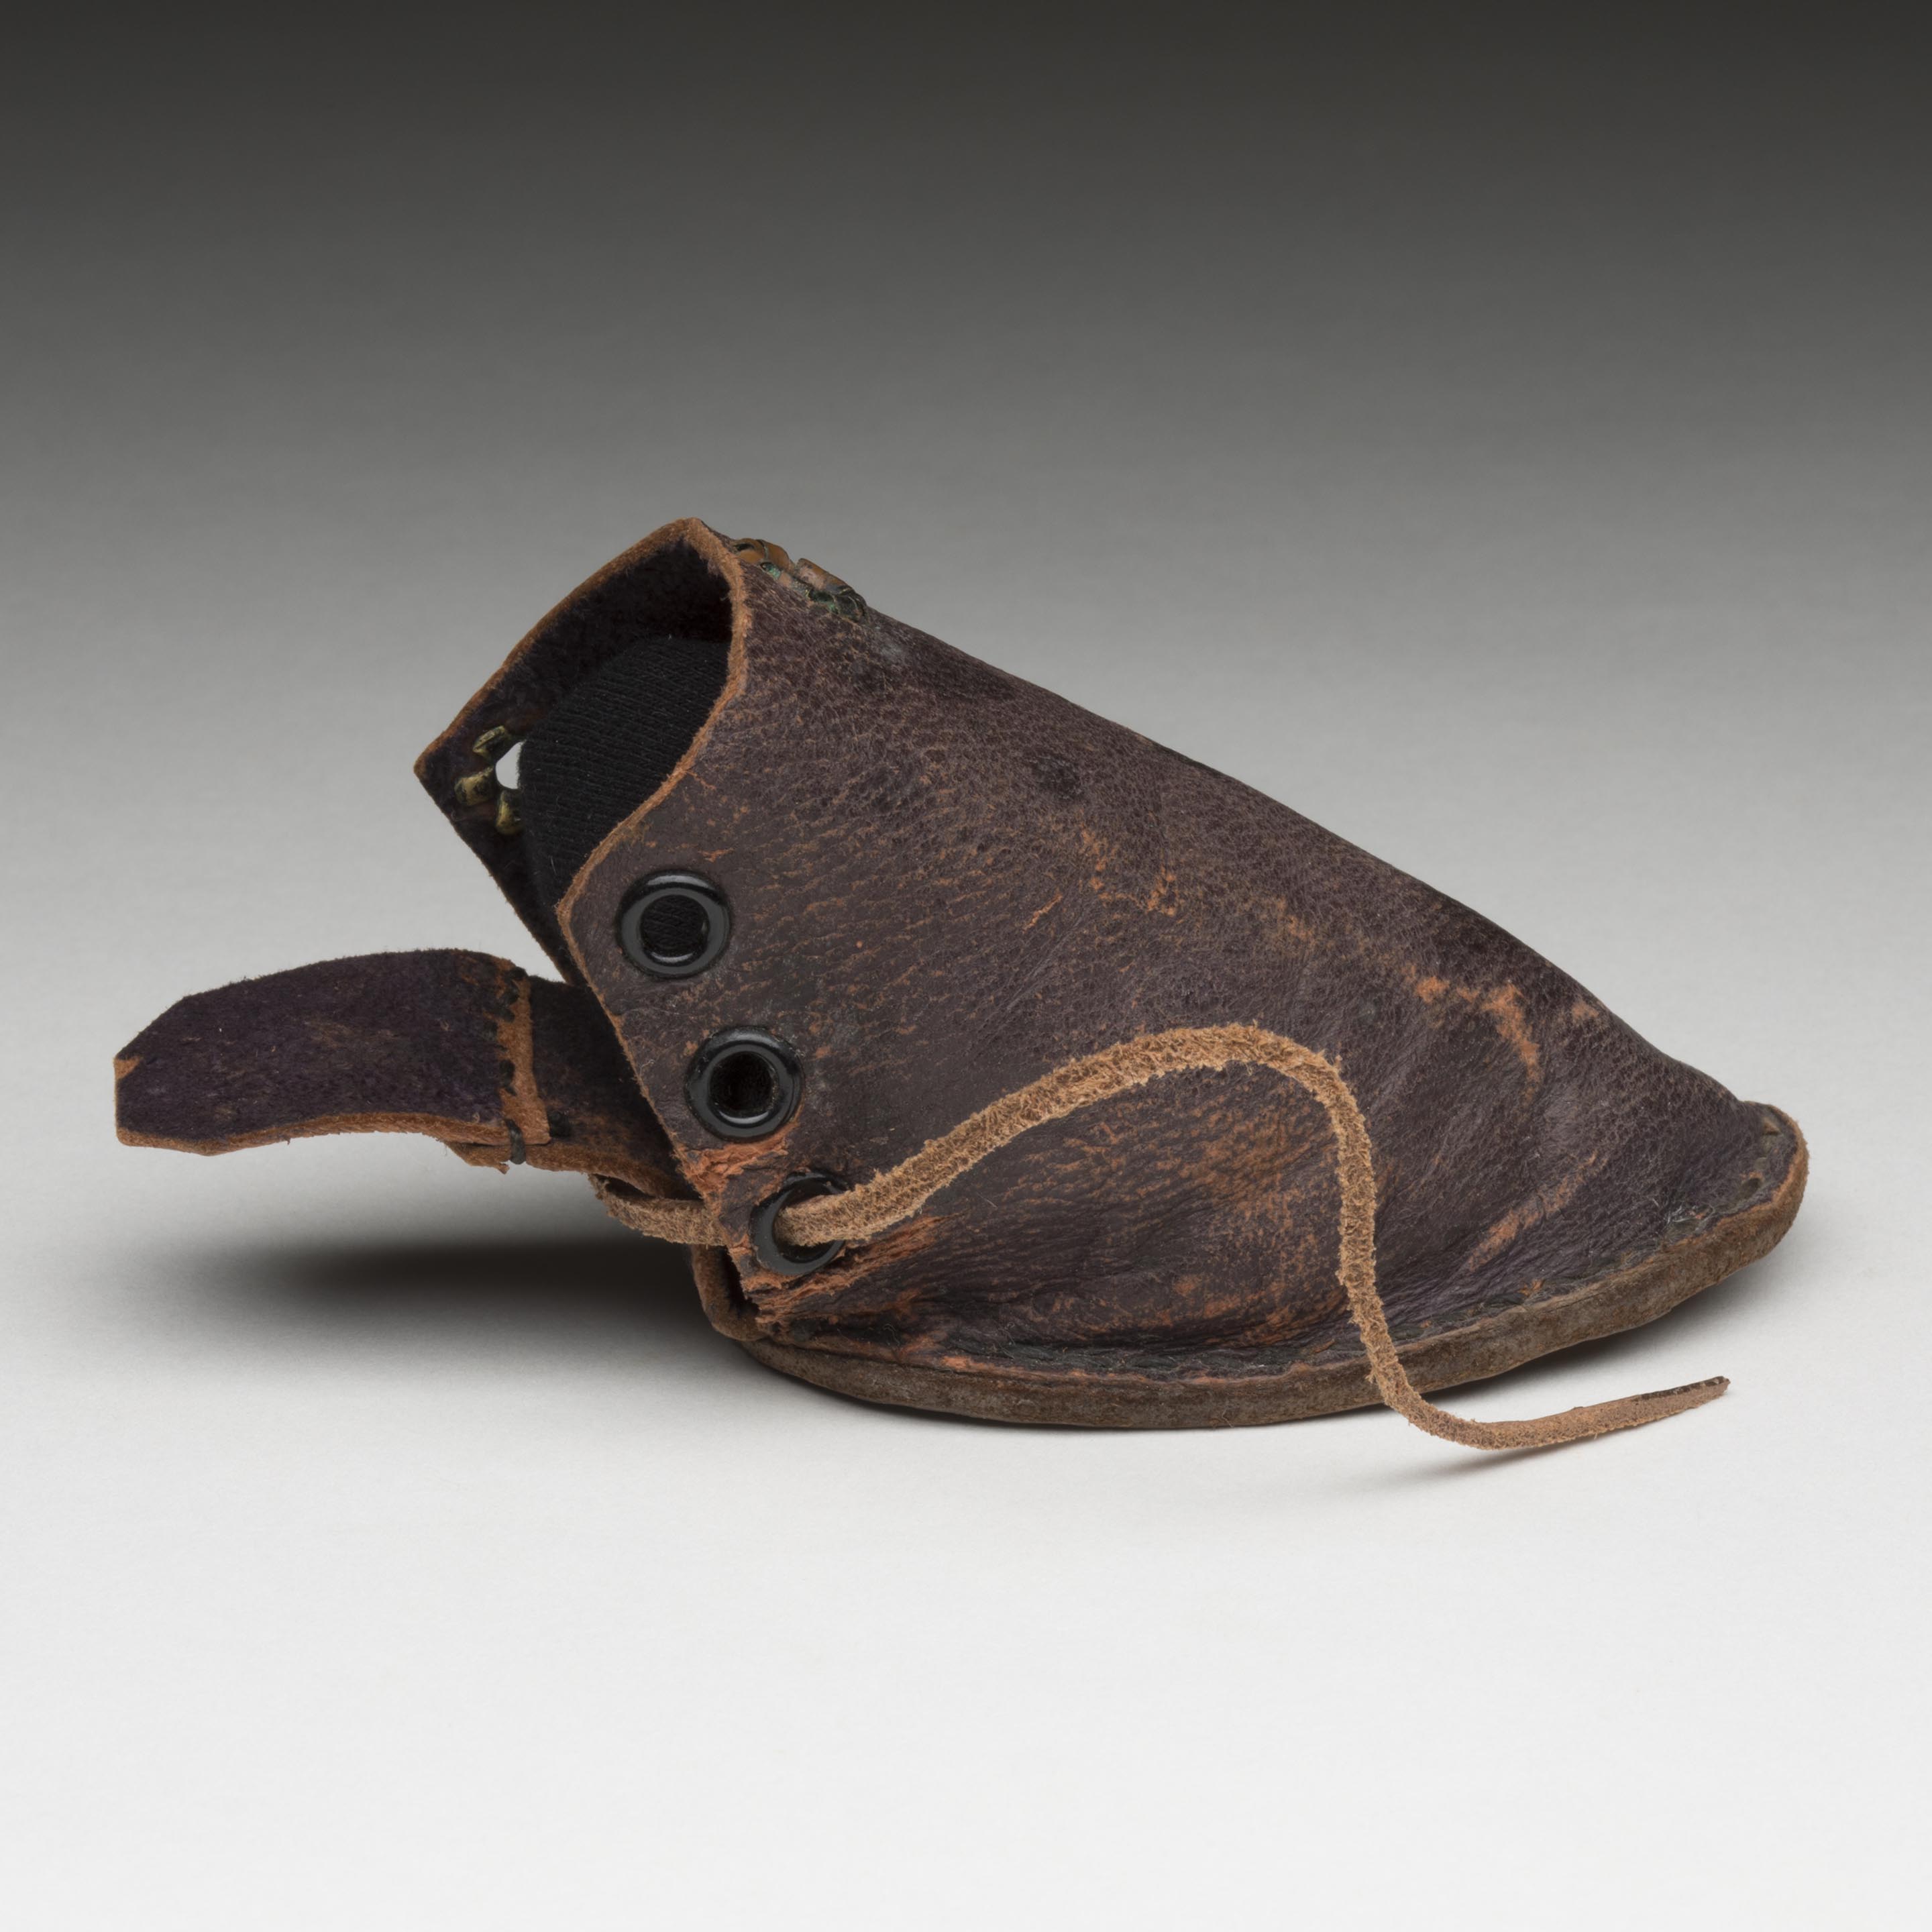 Leather dog shoe worn on long bush walking trips in the Blue Mountains by the Dunphy's fox terrier named Dextre.